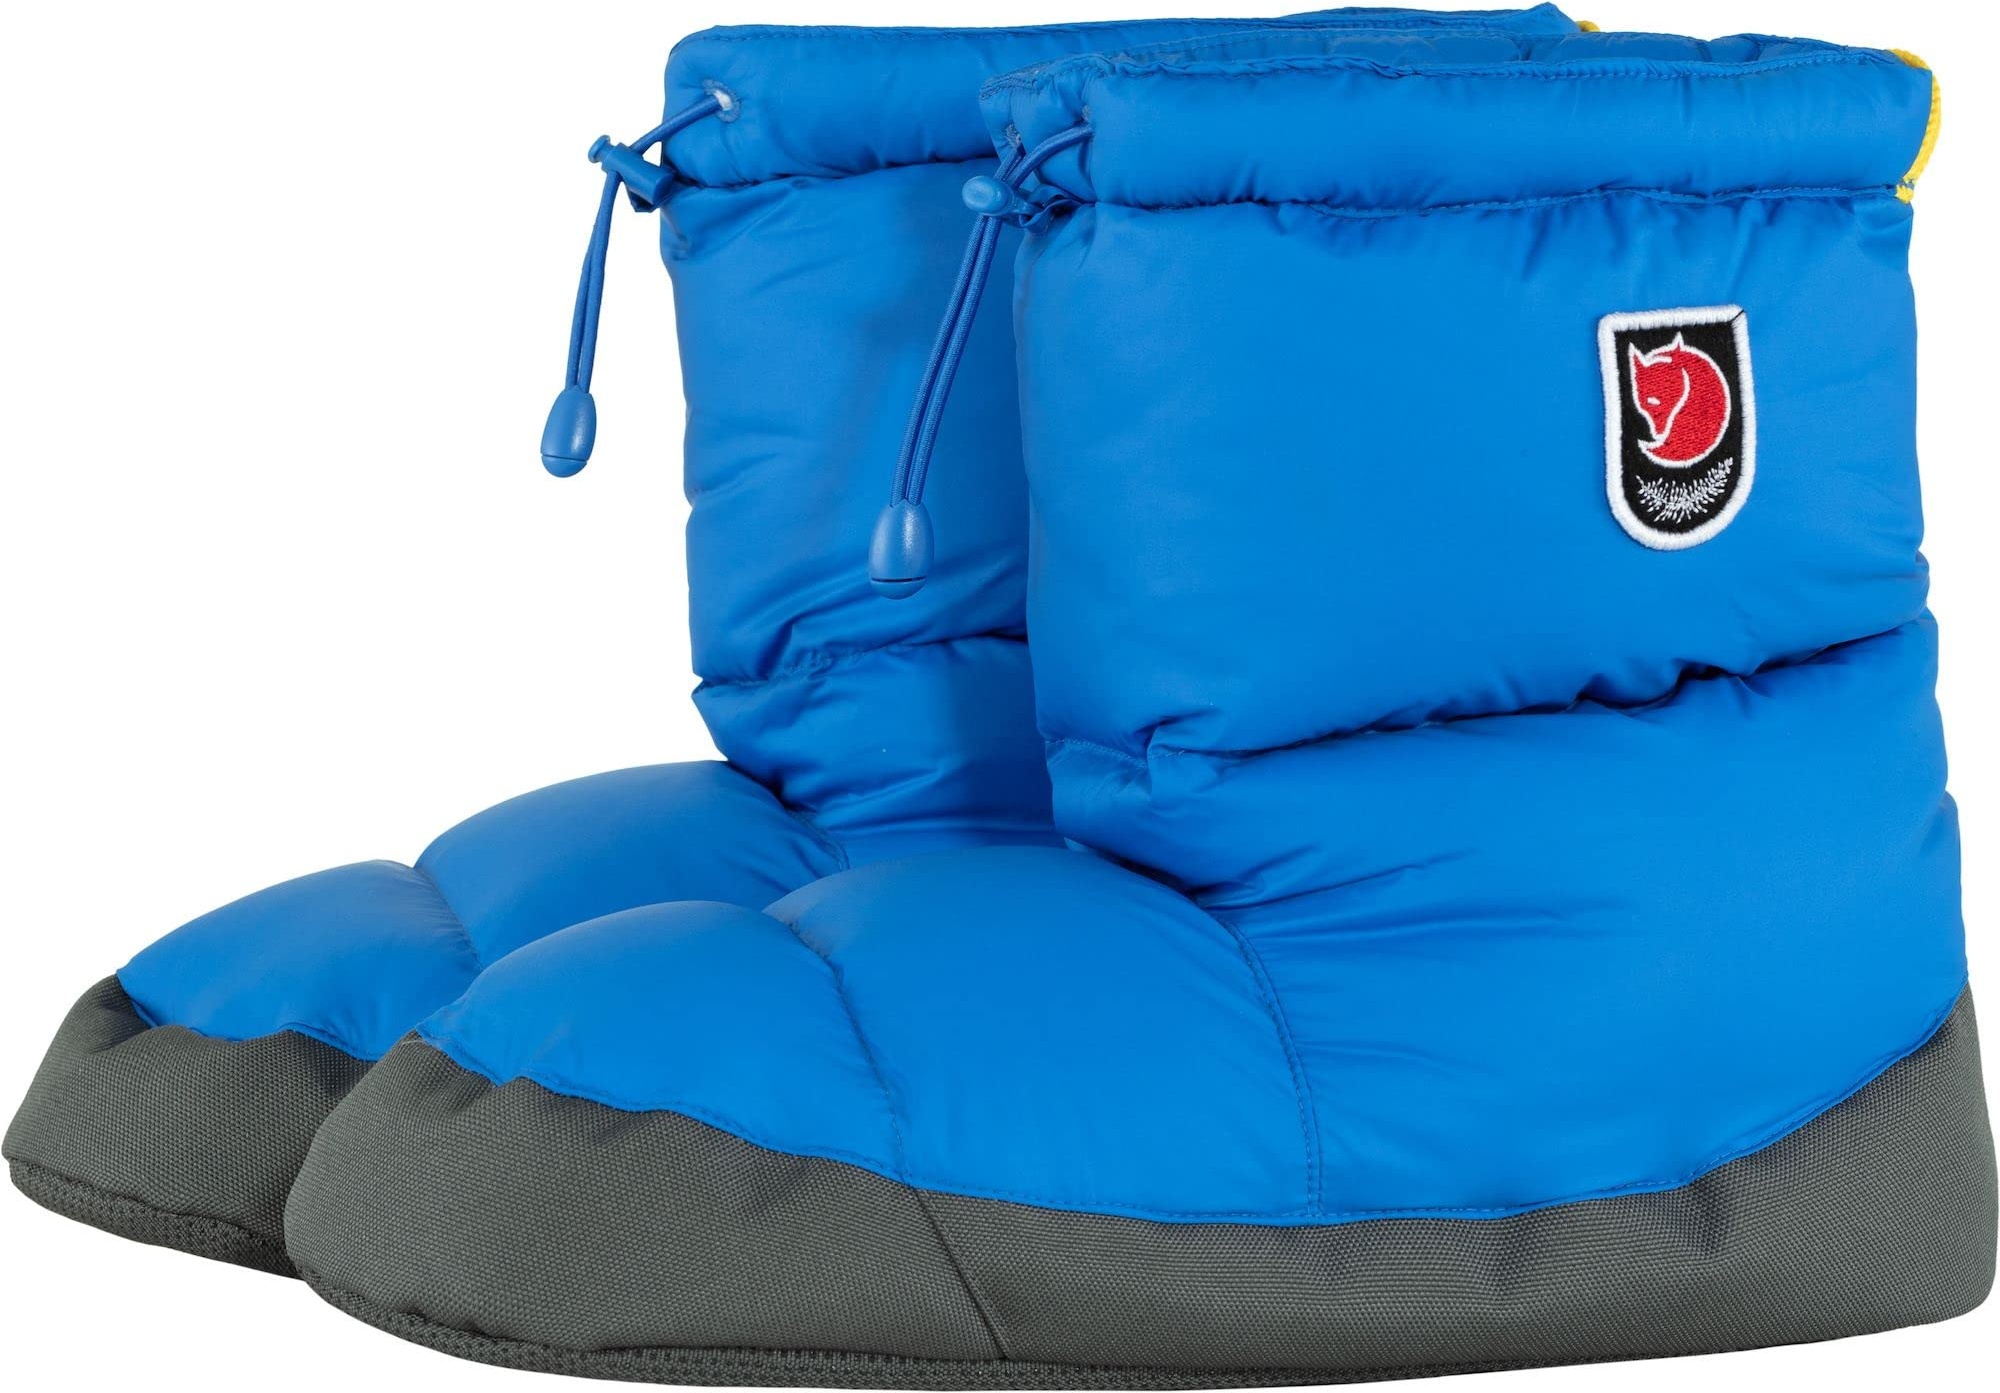 Fjallraven Unisex Lightweight and Warm Boots for Use in Tent Or Cabin, Convenient to Carry with You. Shoe Covers, UN Blue